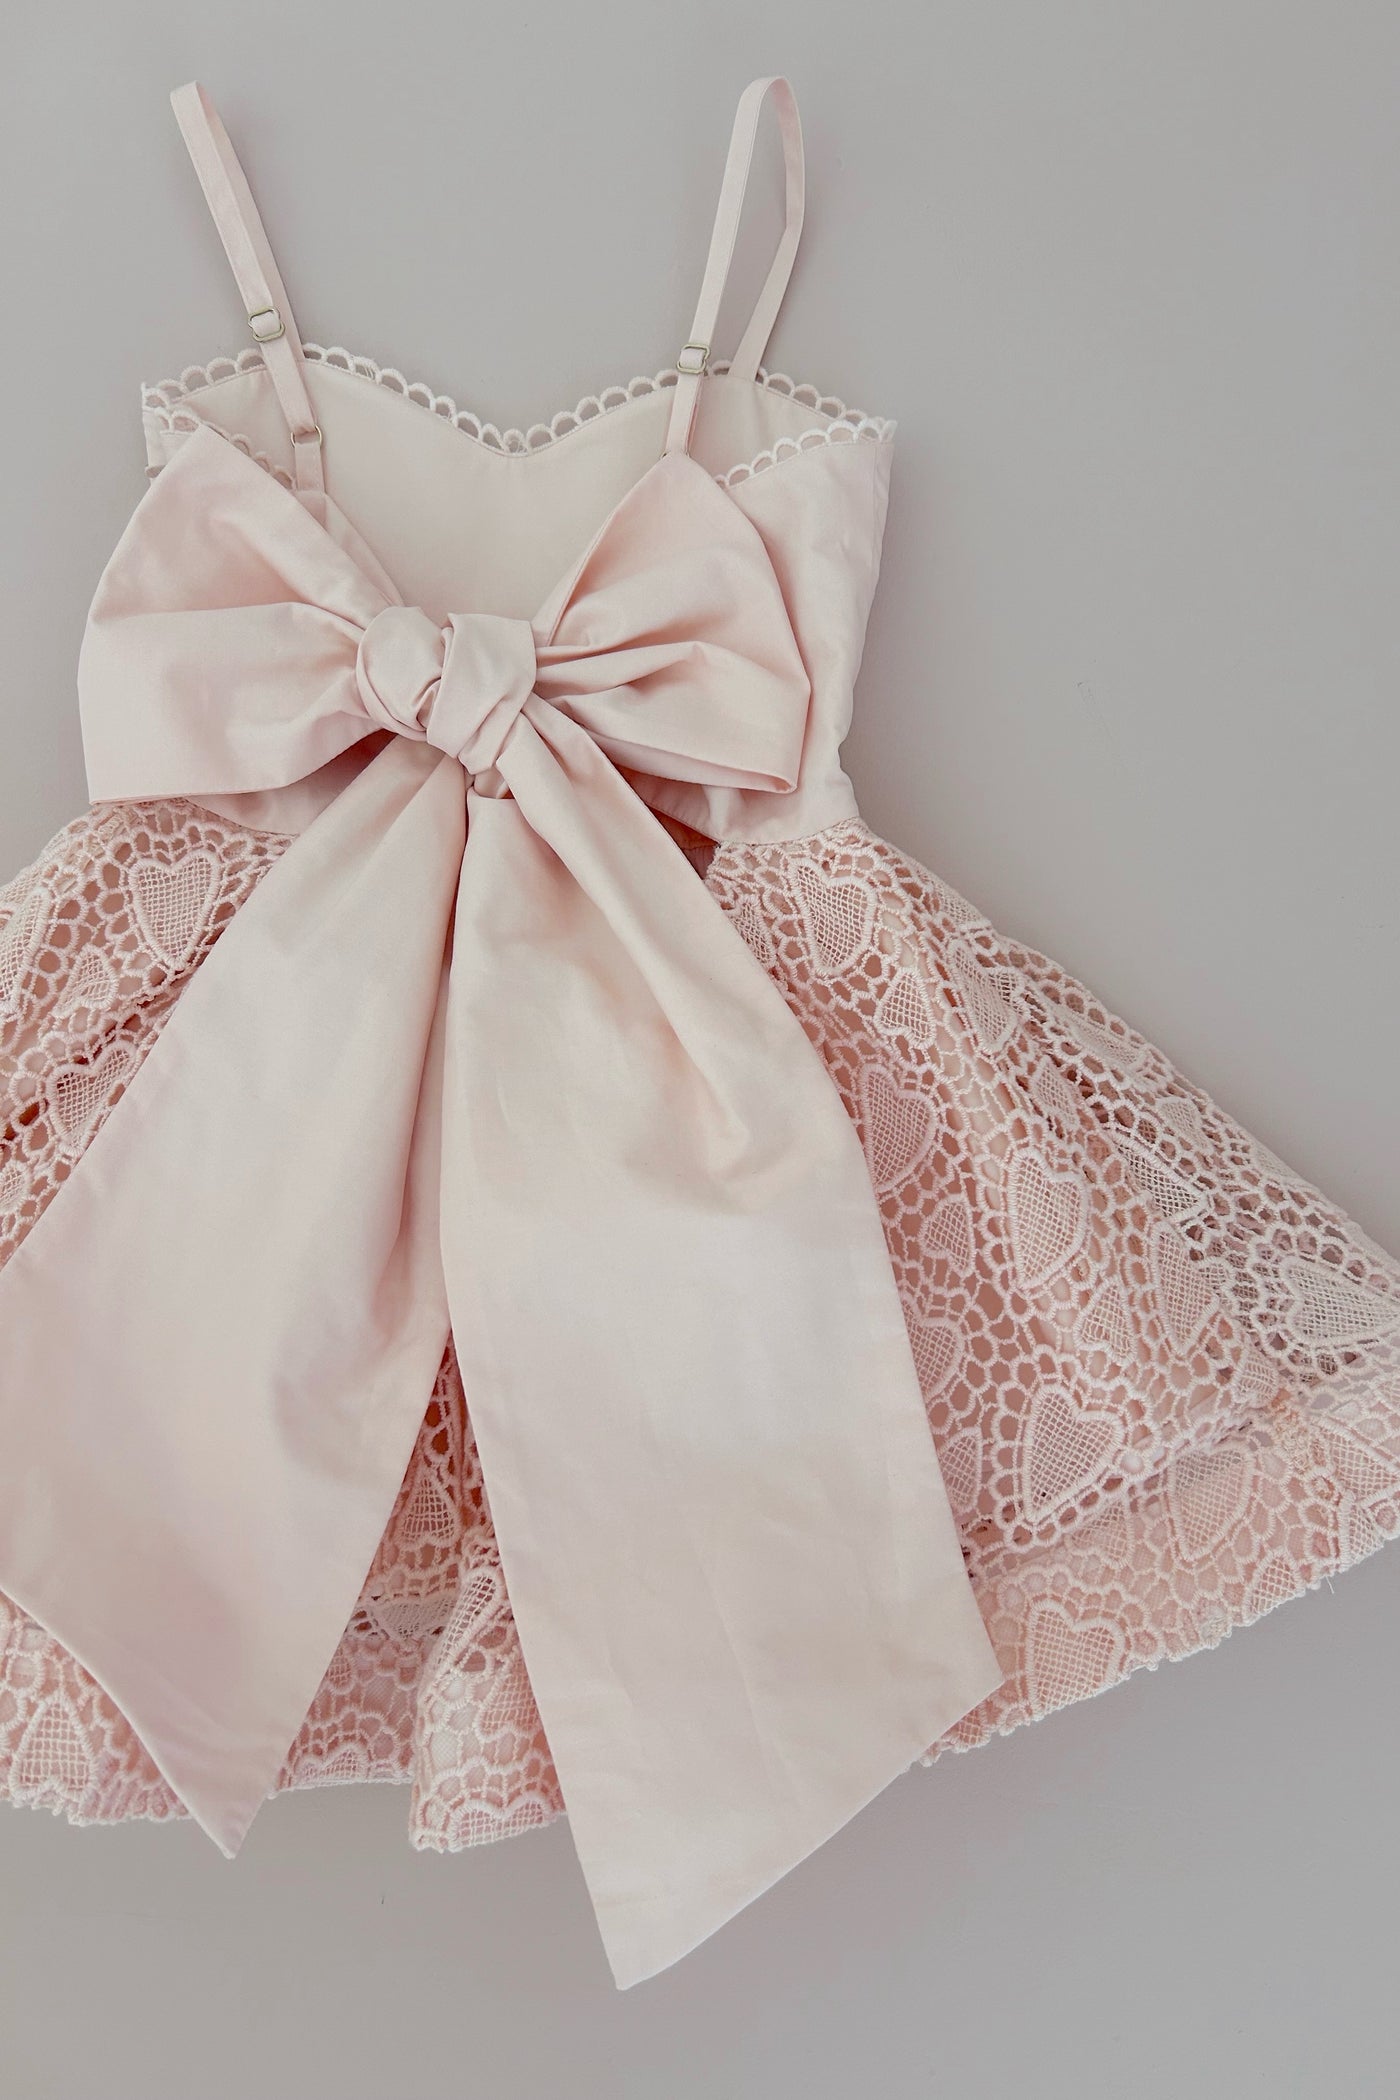 How Sweet It Is Dress - Ballet Pink Hearts Lace